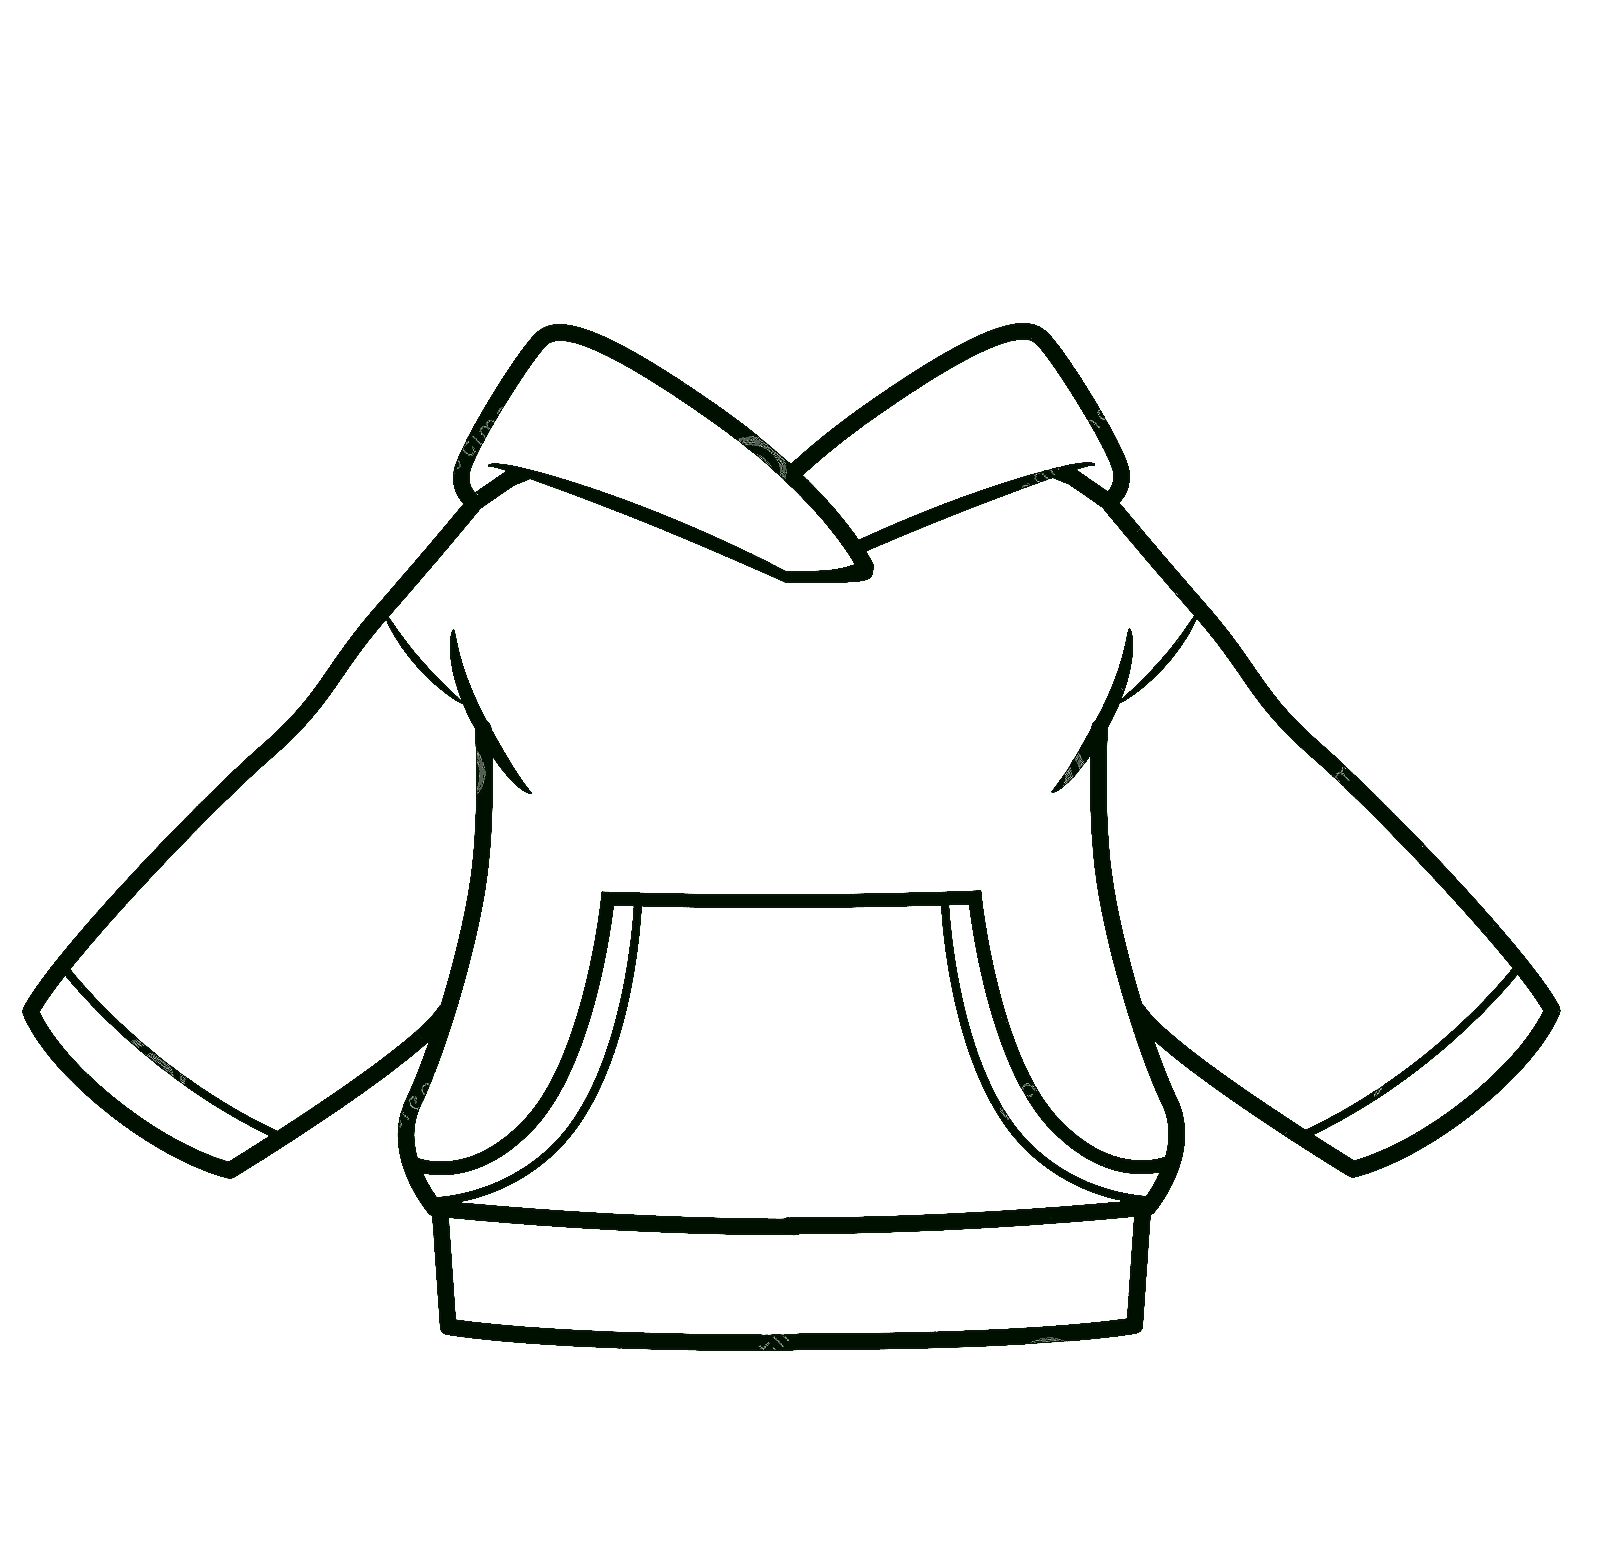 Hoodie With Pocket Outline For Coloring On A White Coloring Page